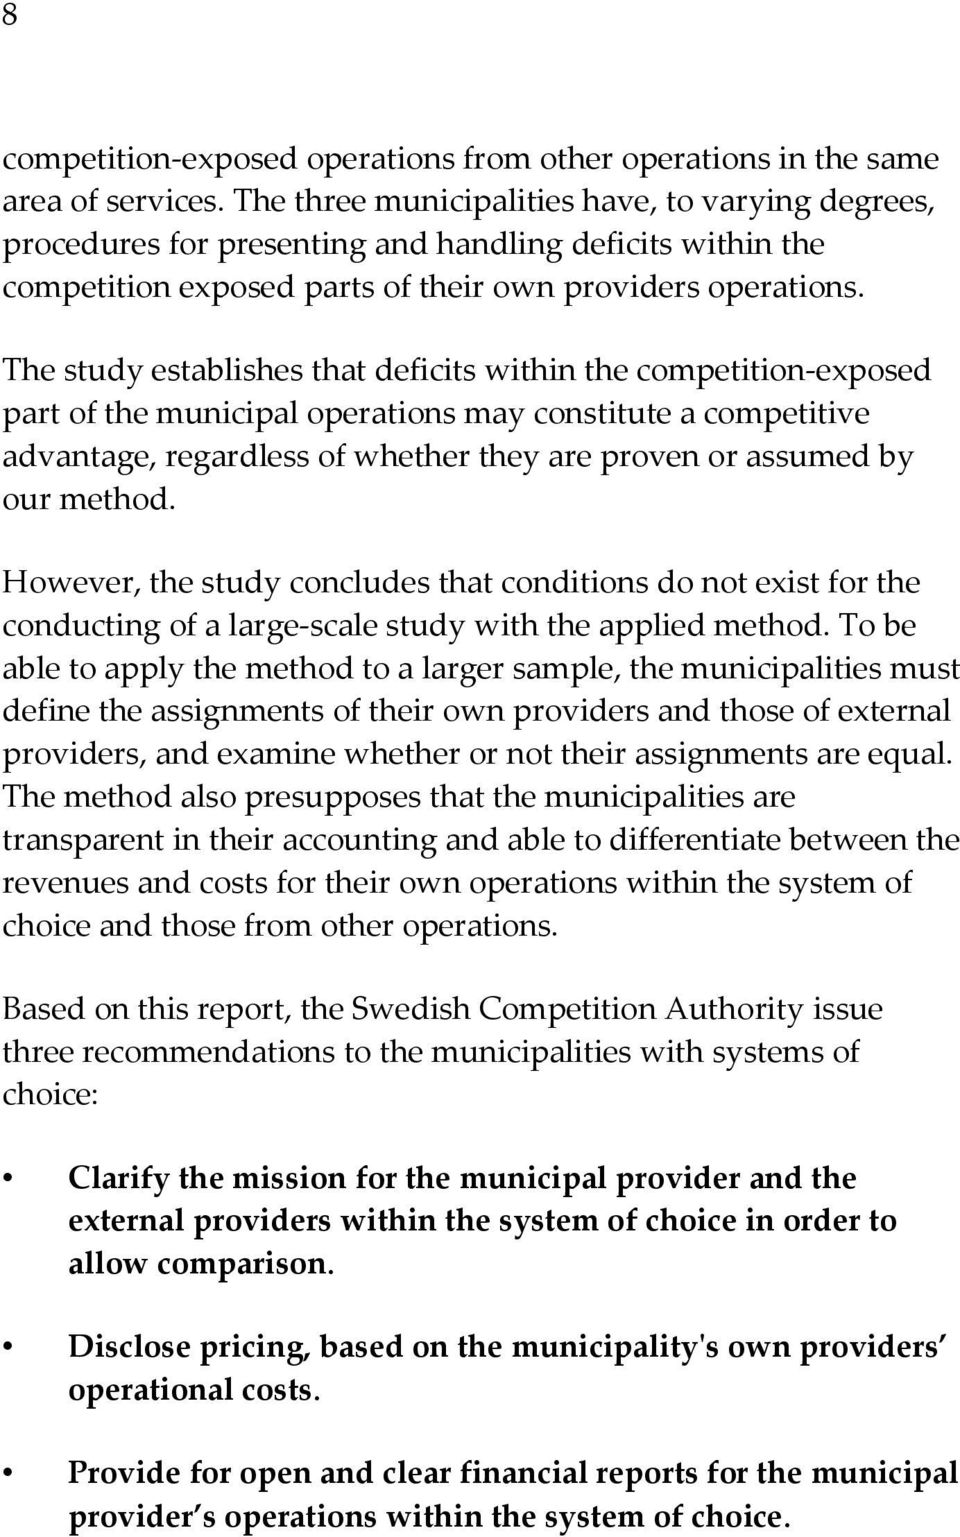 The study establishes that deficits within the competition-exposed part of the municipal operations may constitute a competitive advantage, regardless of whether they are proven or assumed by our